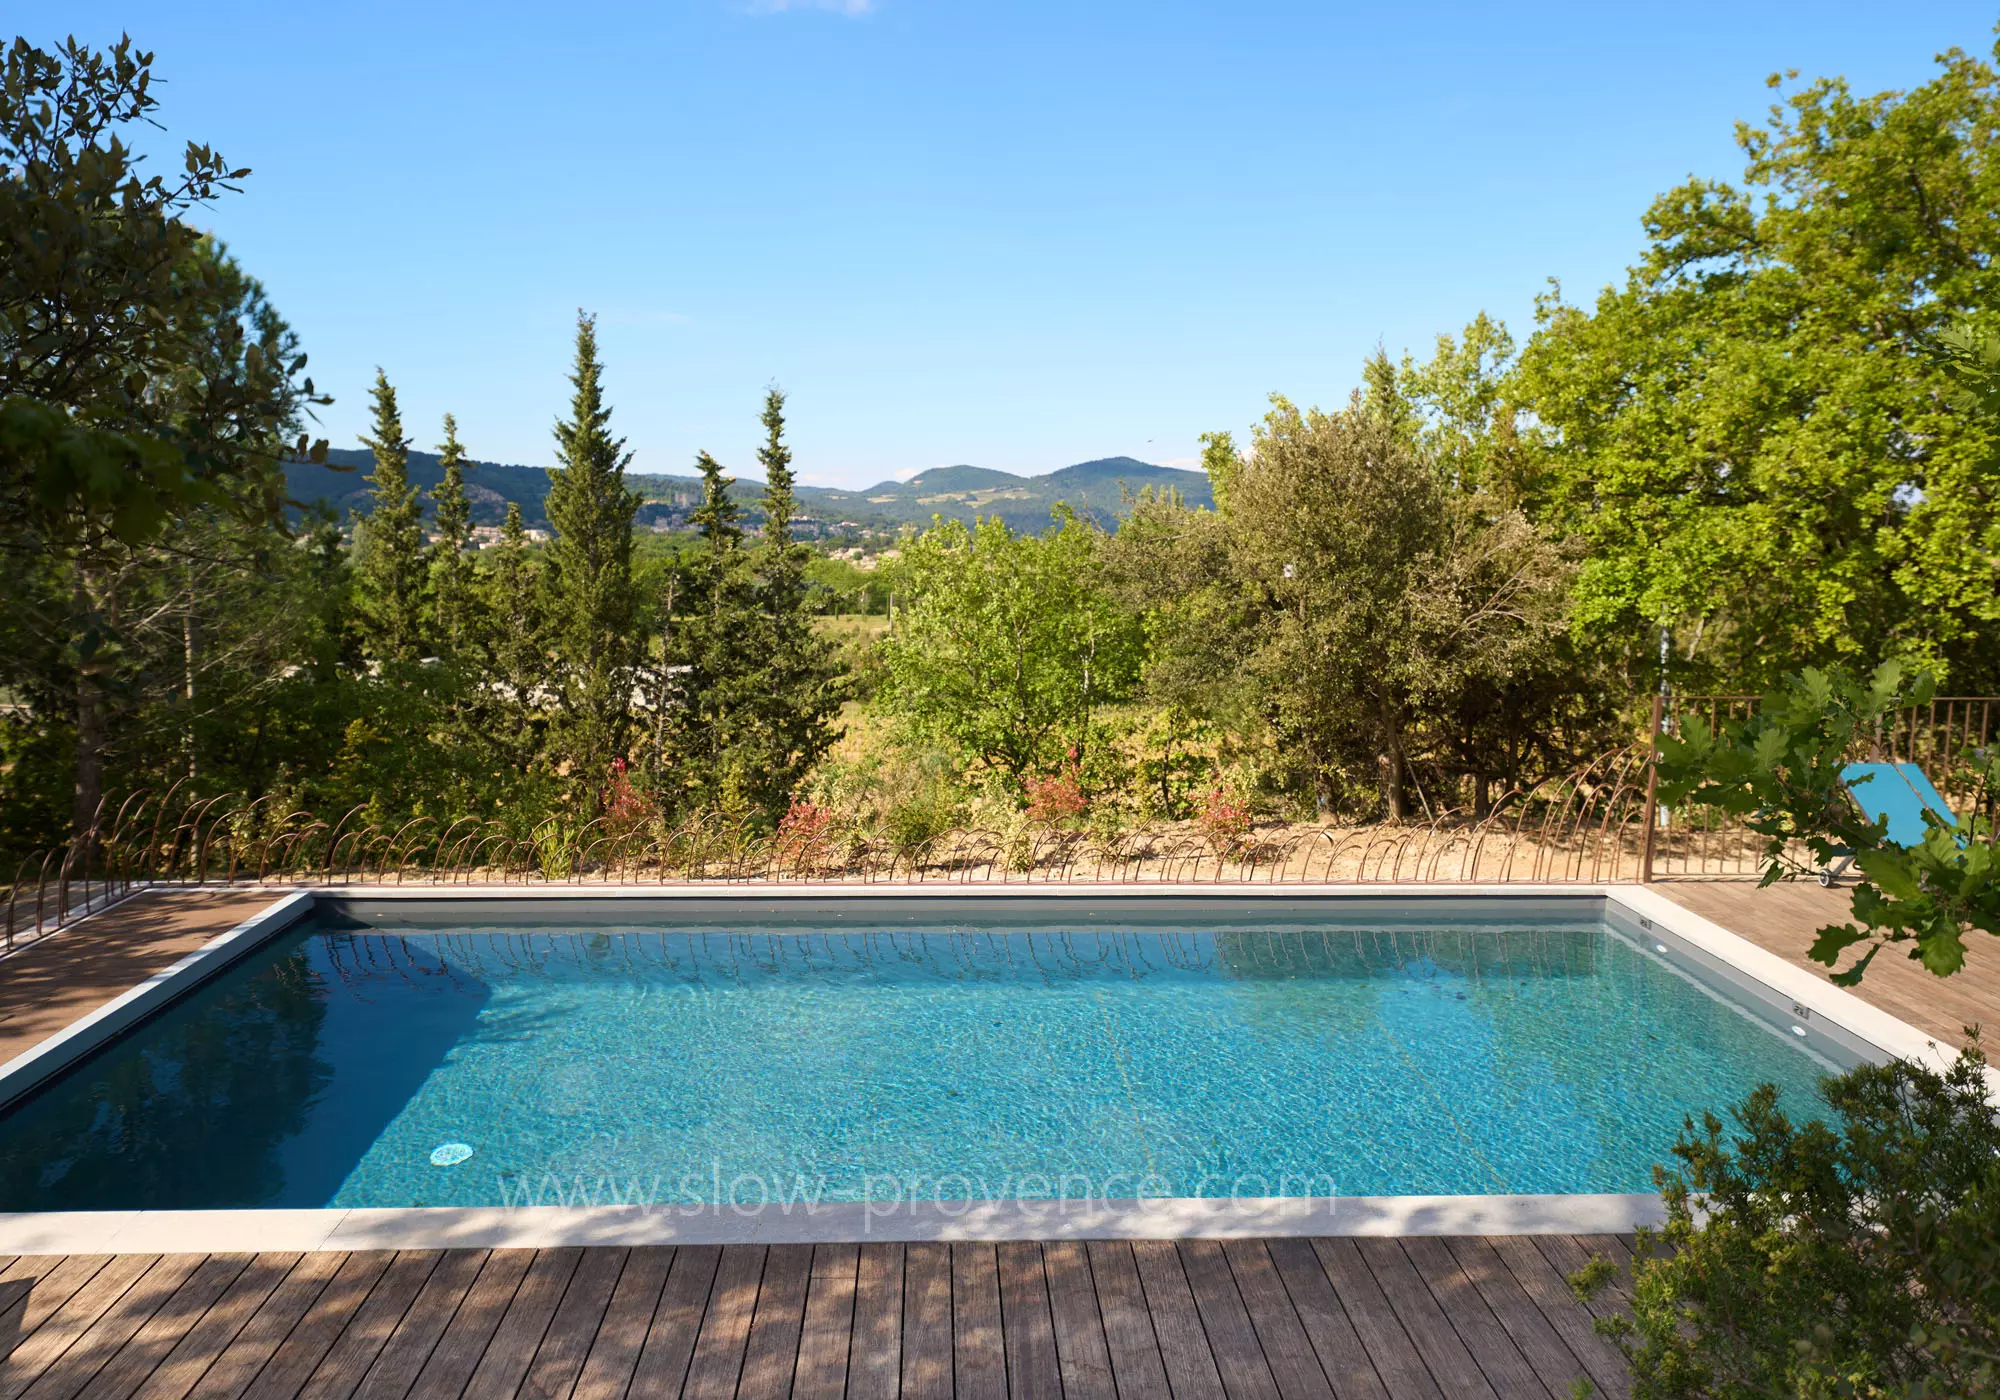 Beautiful pool with a view over the medieval castle of Vaison